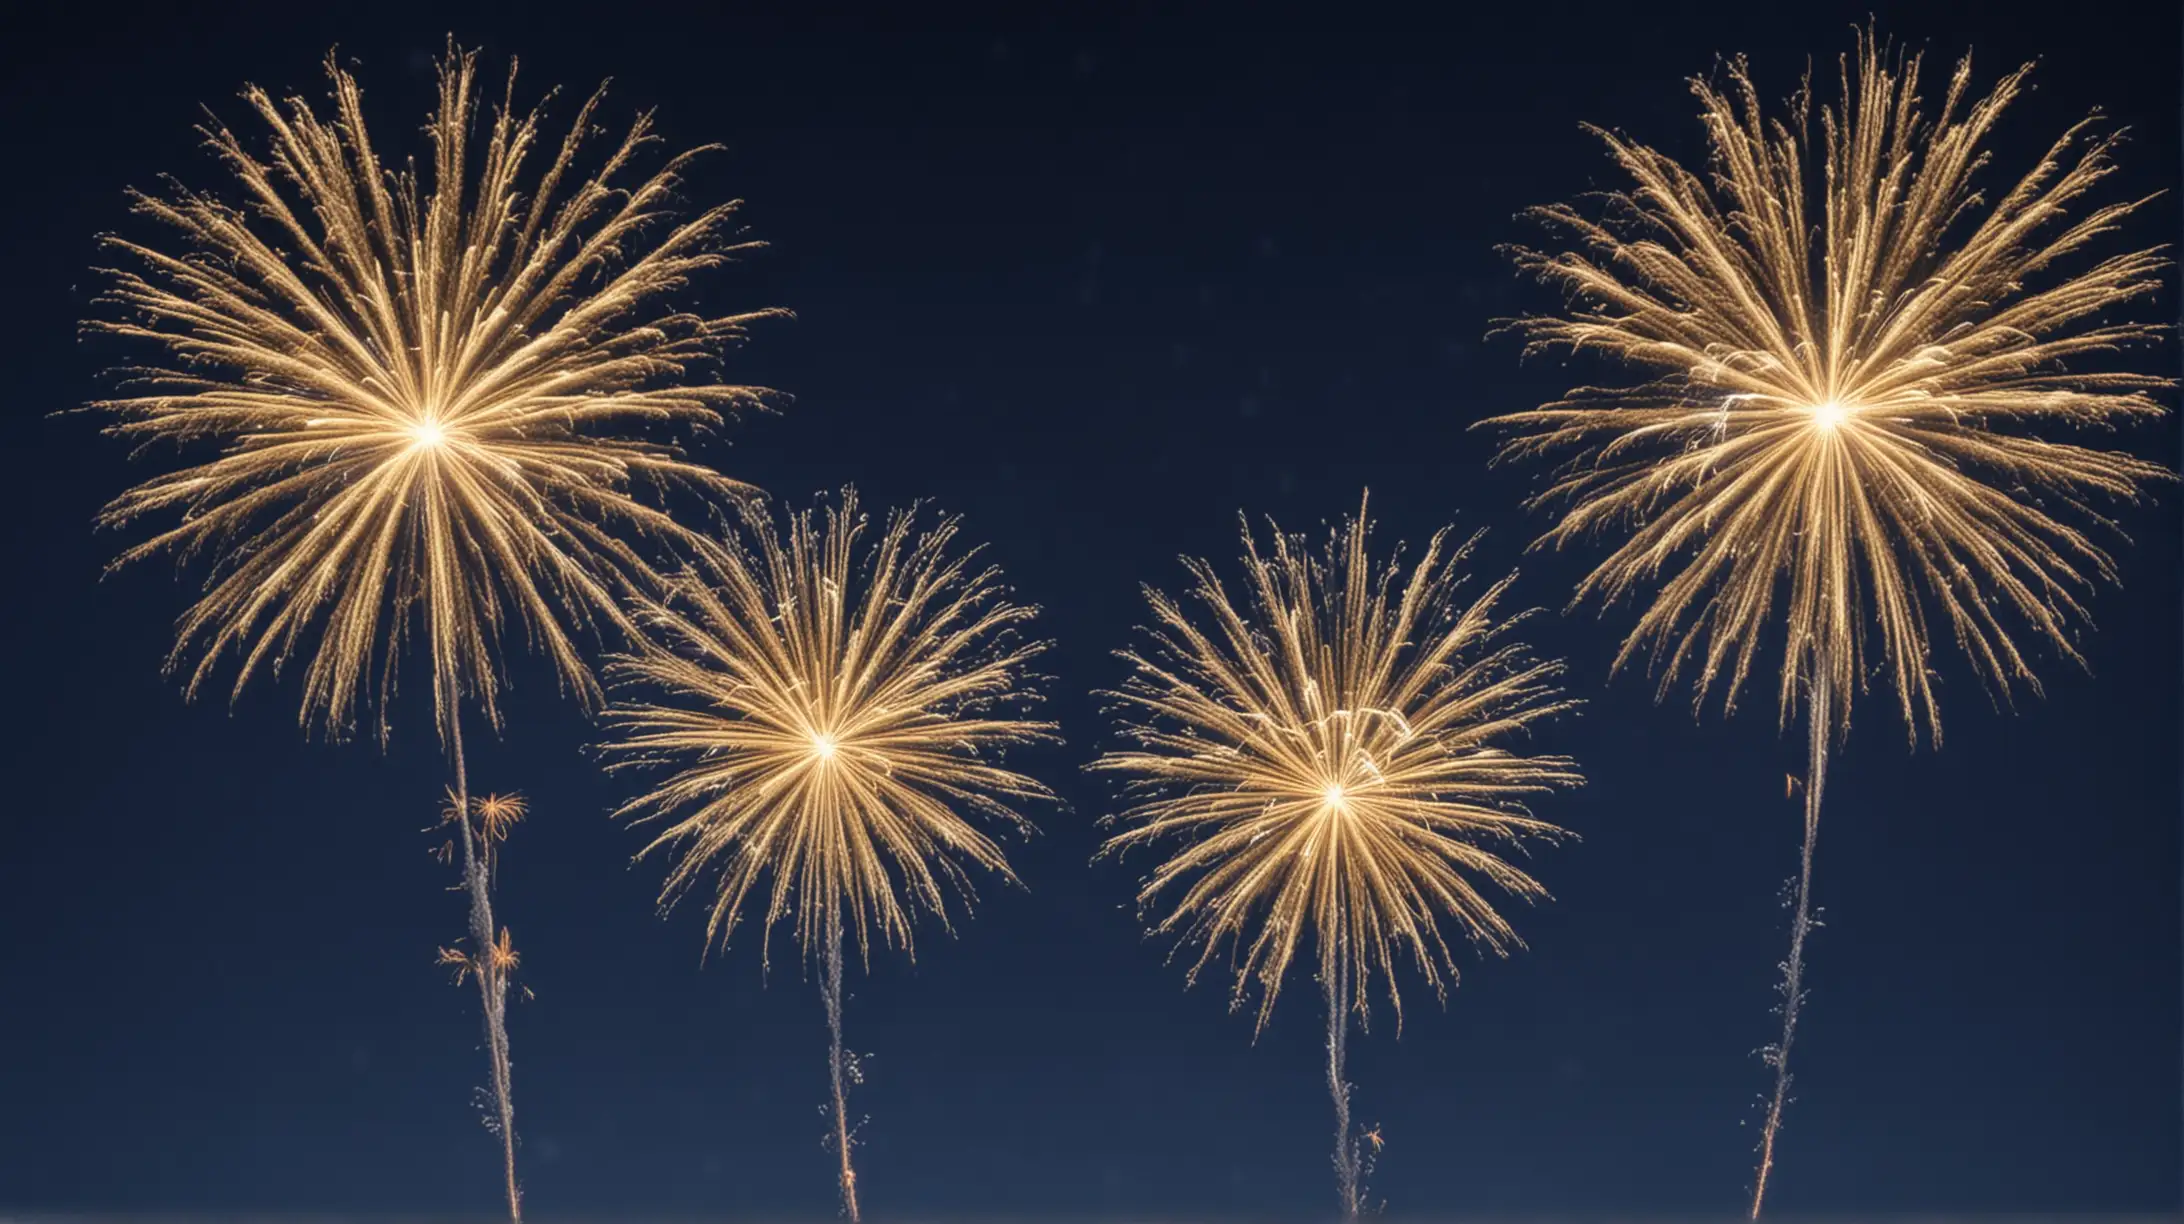 3 very very super small silver and gold small glowing firework High in the sky with a natural darkish bold blue sky background with dimension to it and with no ground